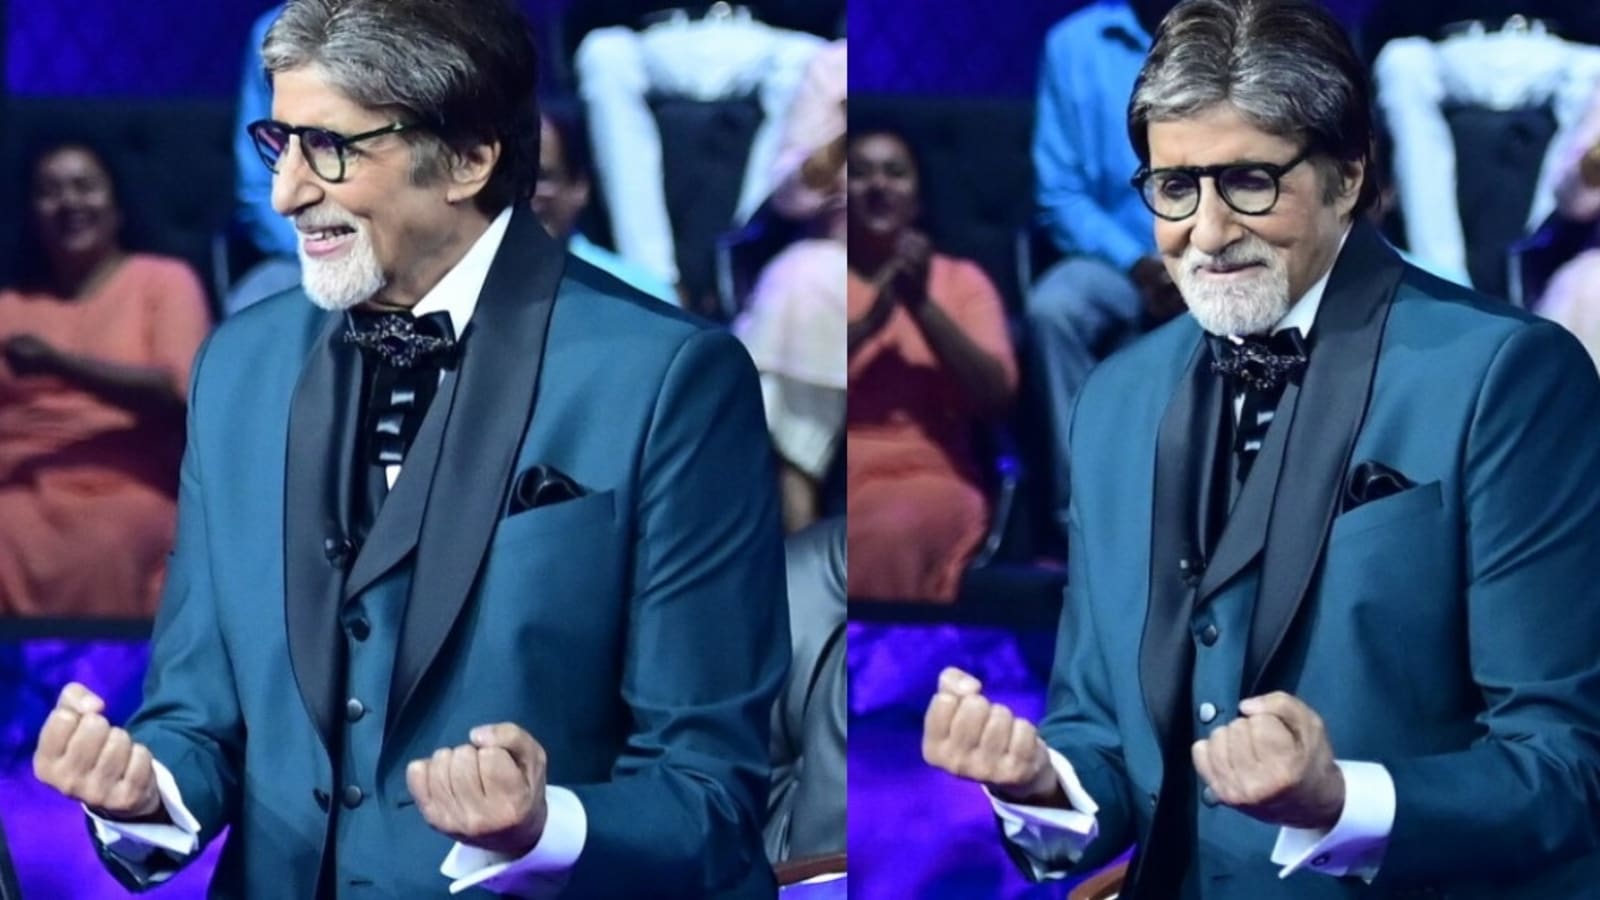 FIR filed against Amitabh Bachchan, KBC makers for 'hurting Hindu  sentiments' | India News - The Indian Express